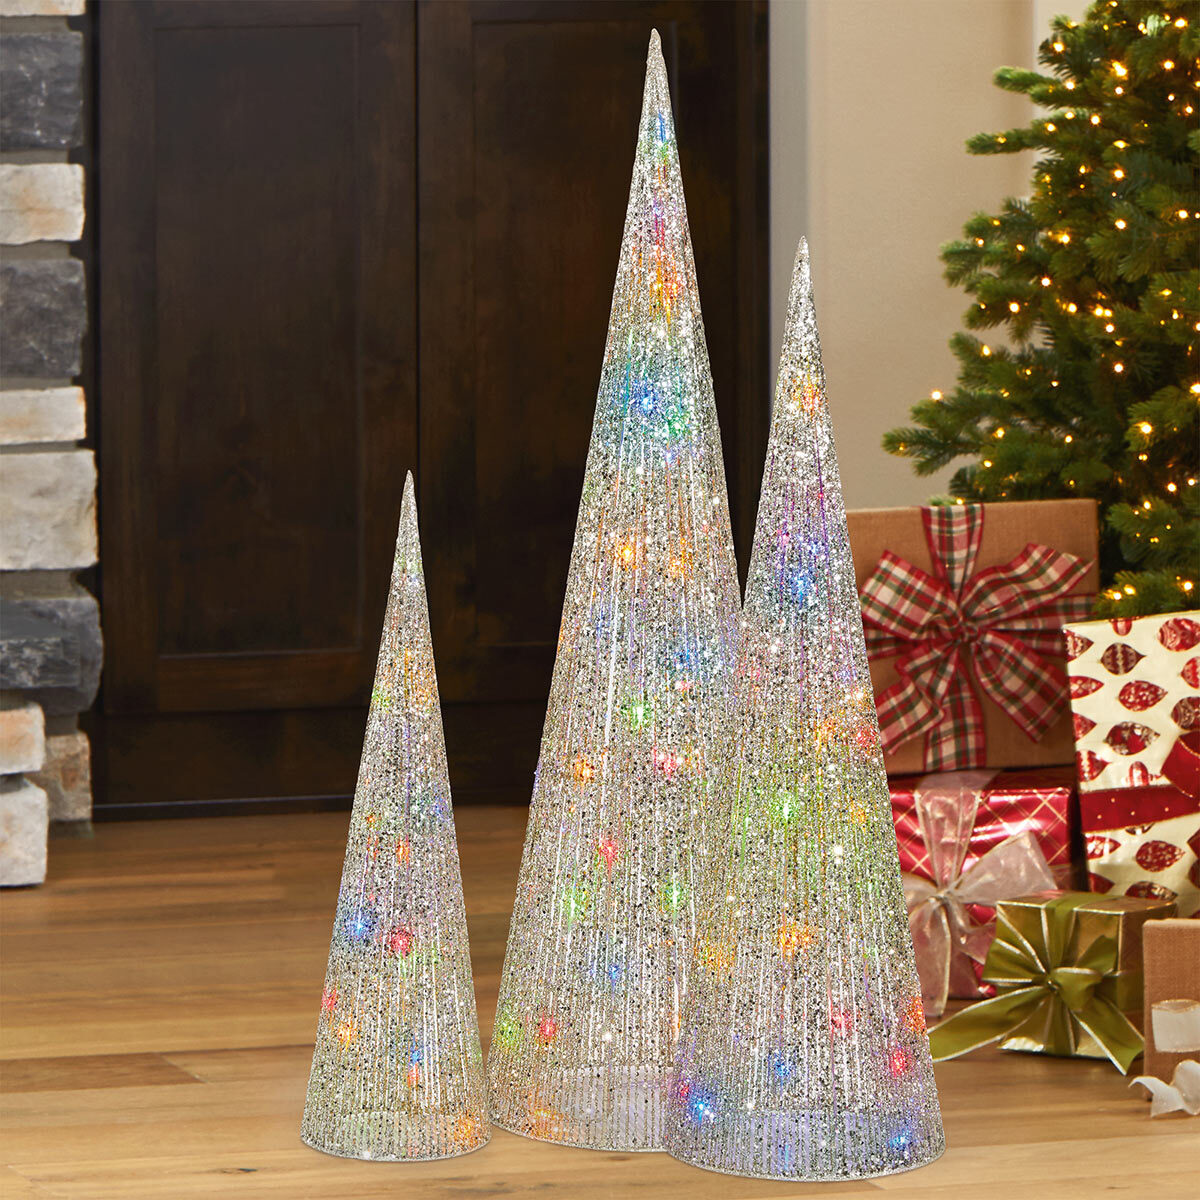 Buy Glitter String Cones Set of 3 LED Indoor Lifestyle1 Image at Costco.co.uk